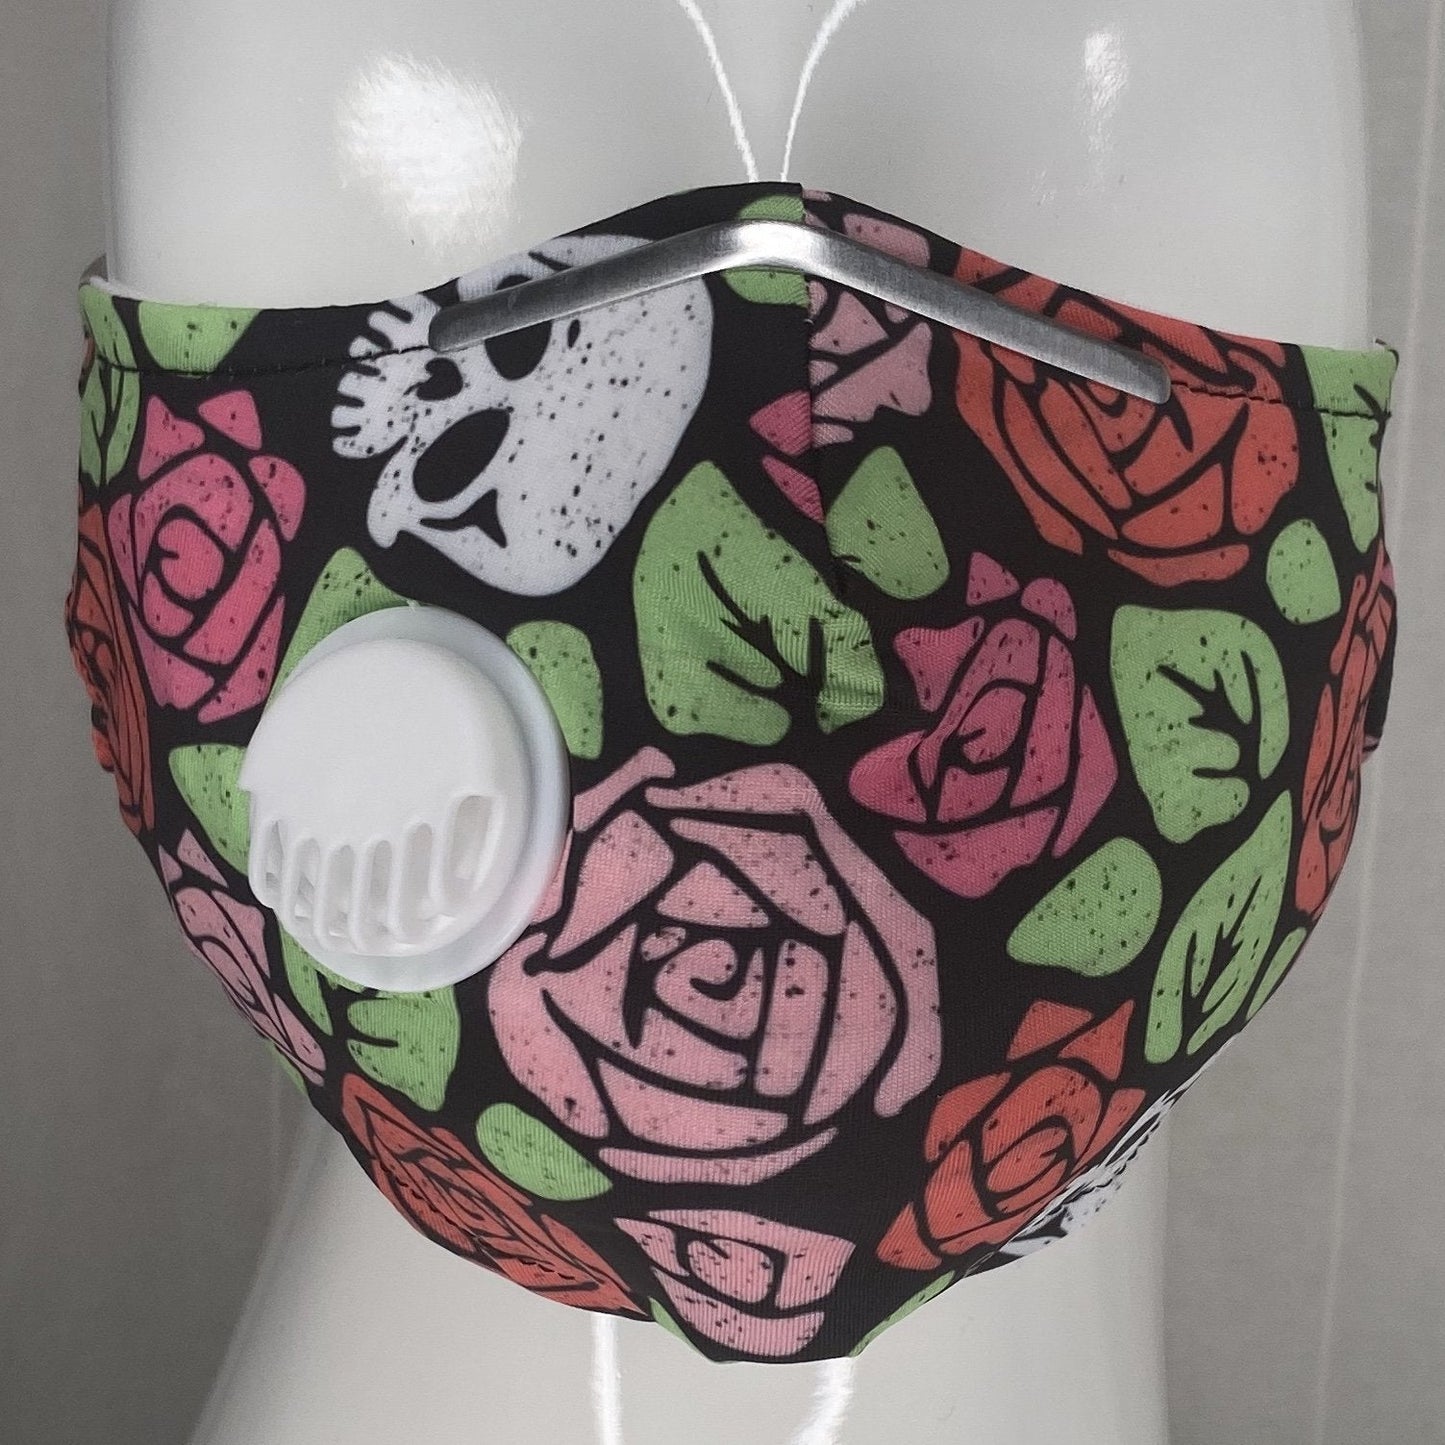 Respirator PM 2.5 Mask With Filter Pocket And 2 Filters (Rose And Skull Print) In Stock-Boughie Curves-Boughie